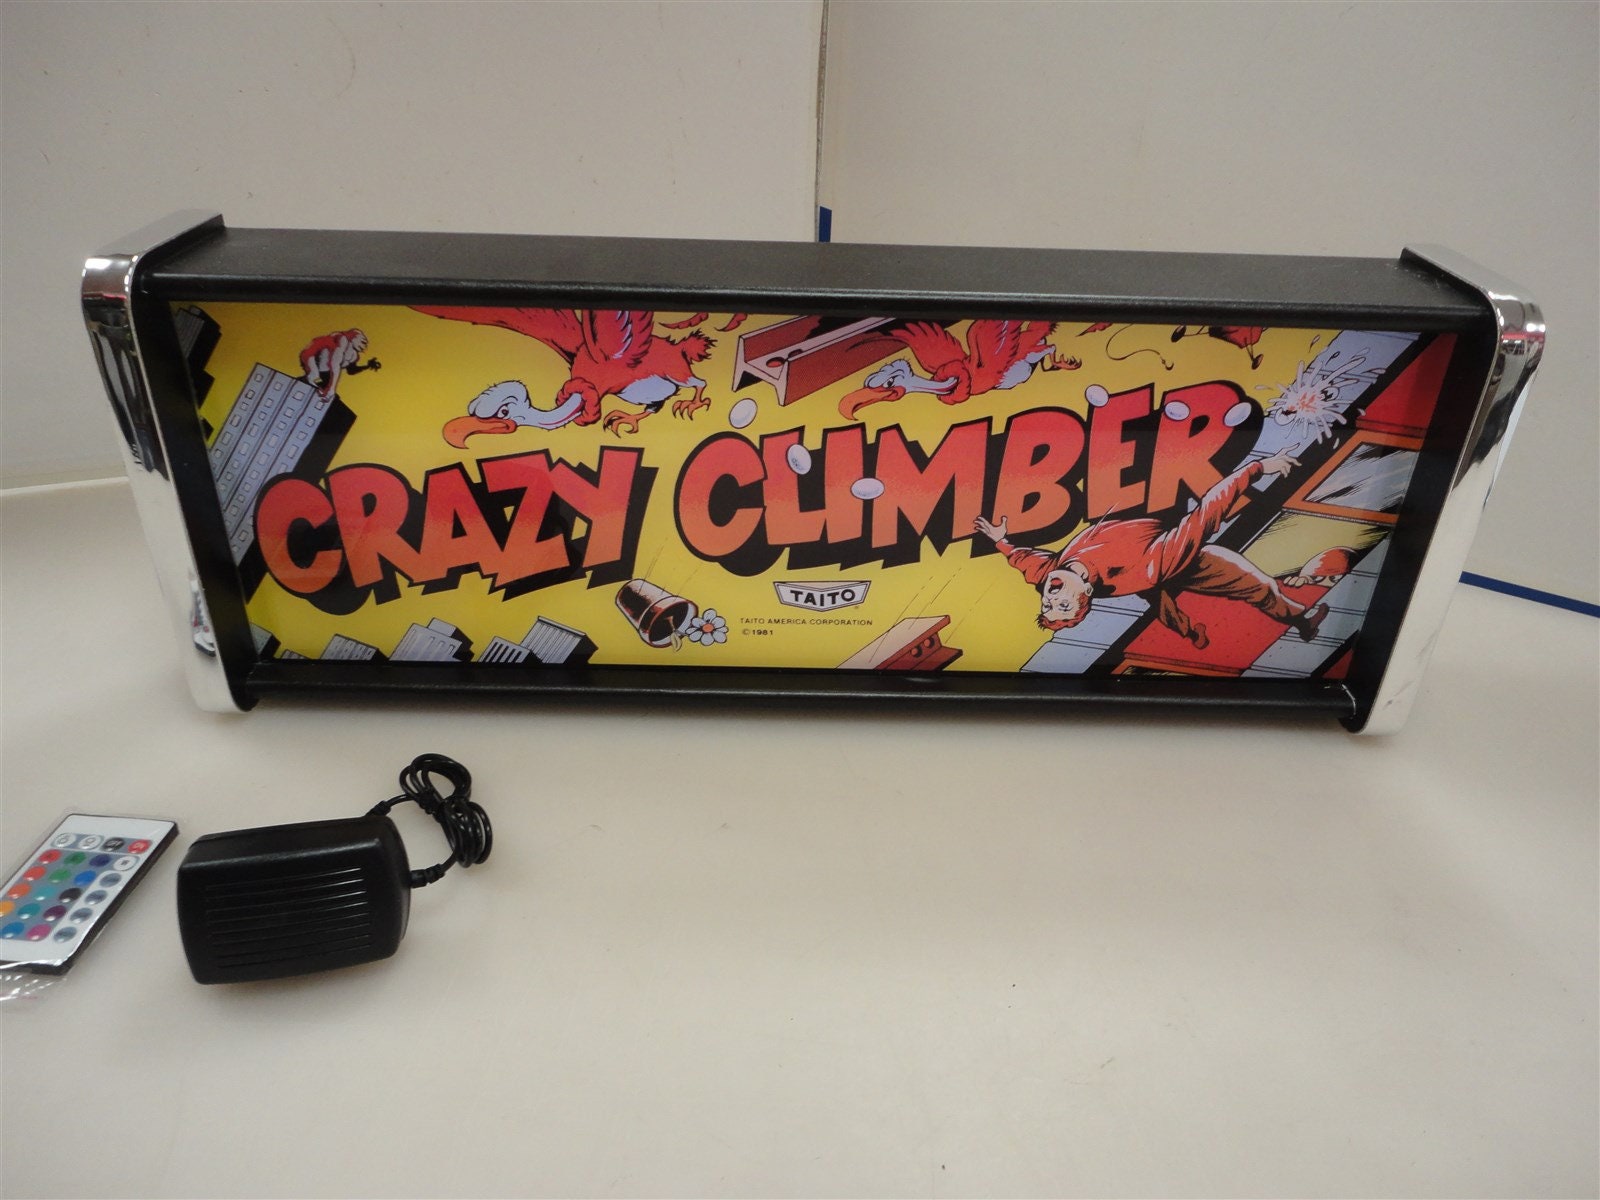 Bandai Mame Game Crazy Climber Mobile Games Key Chains 1997 From